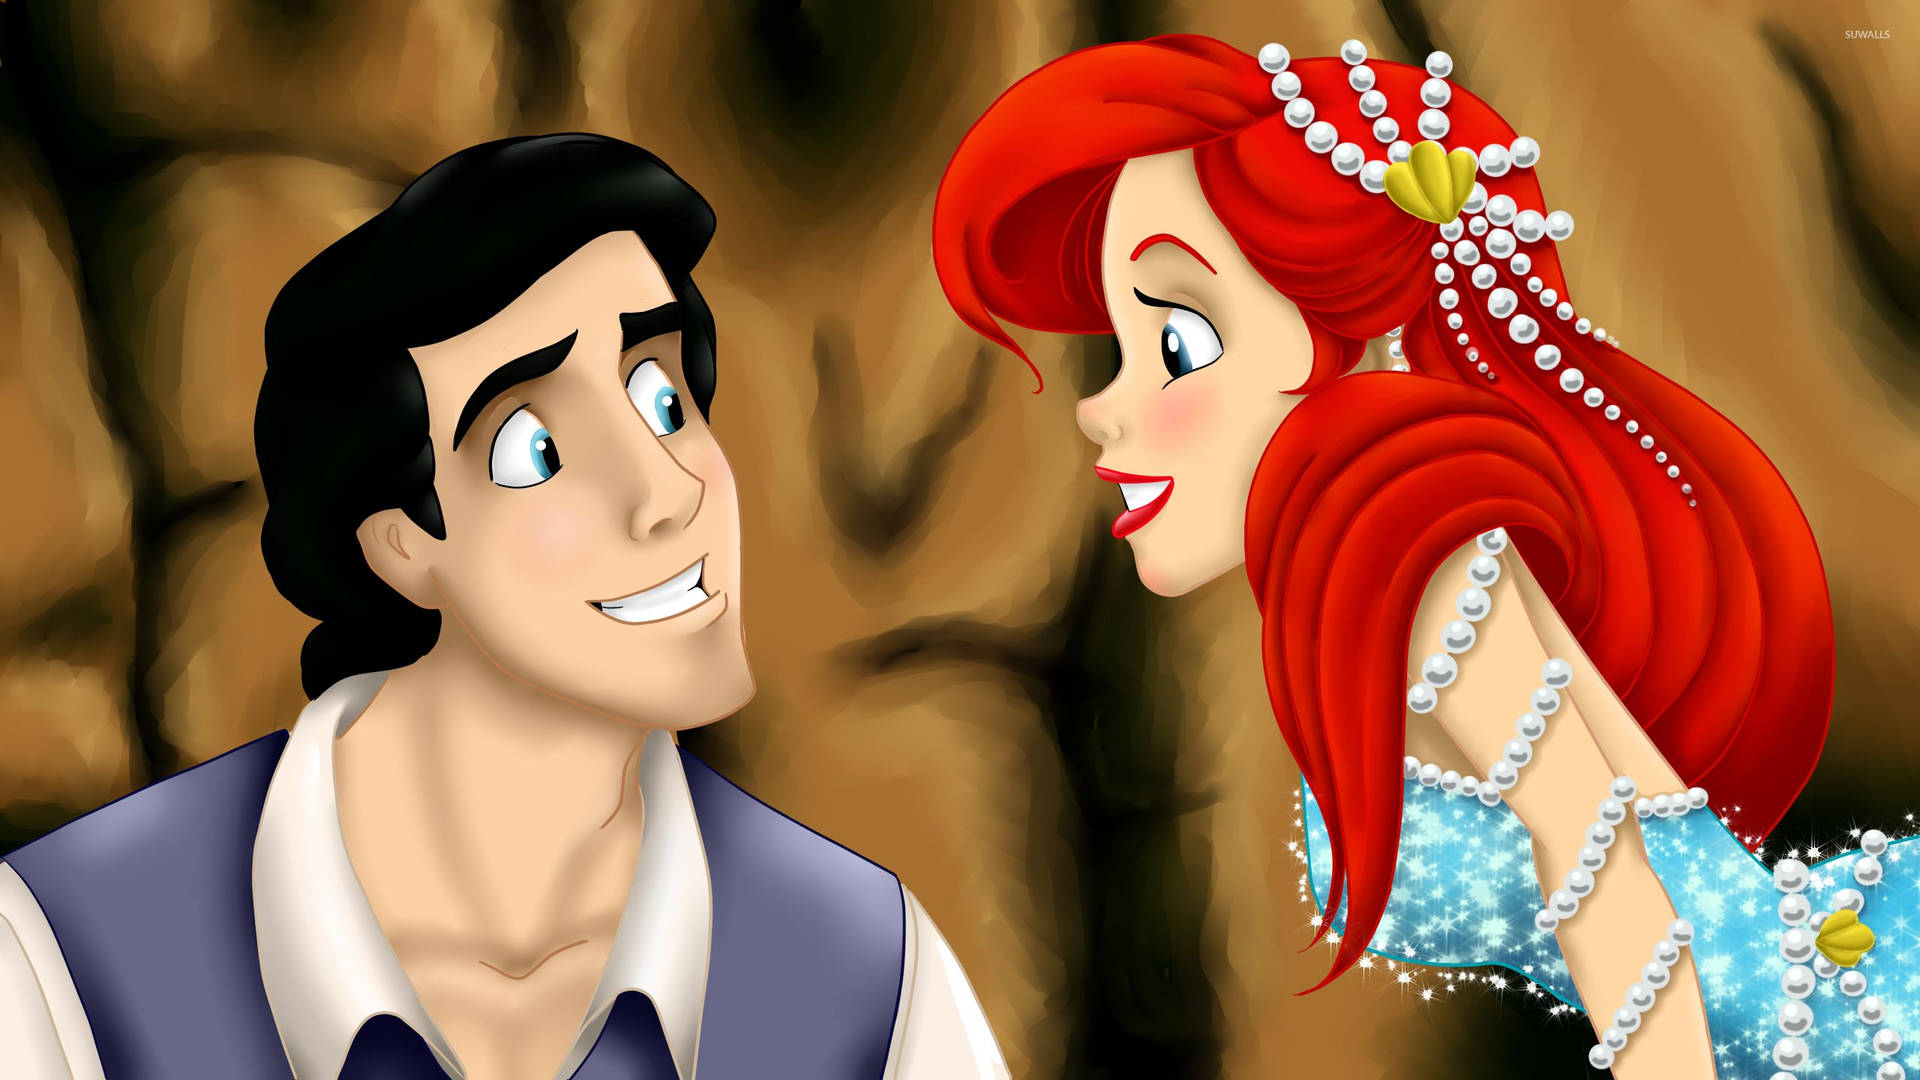 Prince Eric And Ariel The Little Mermaid Background